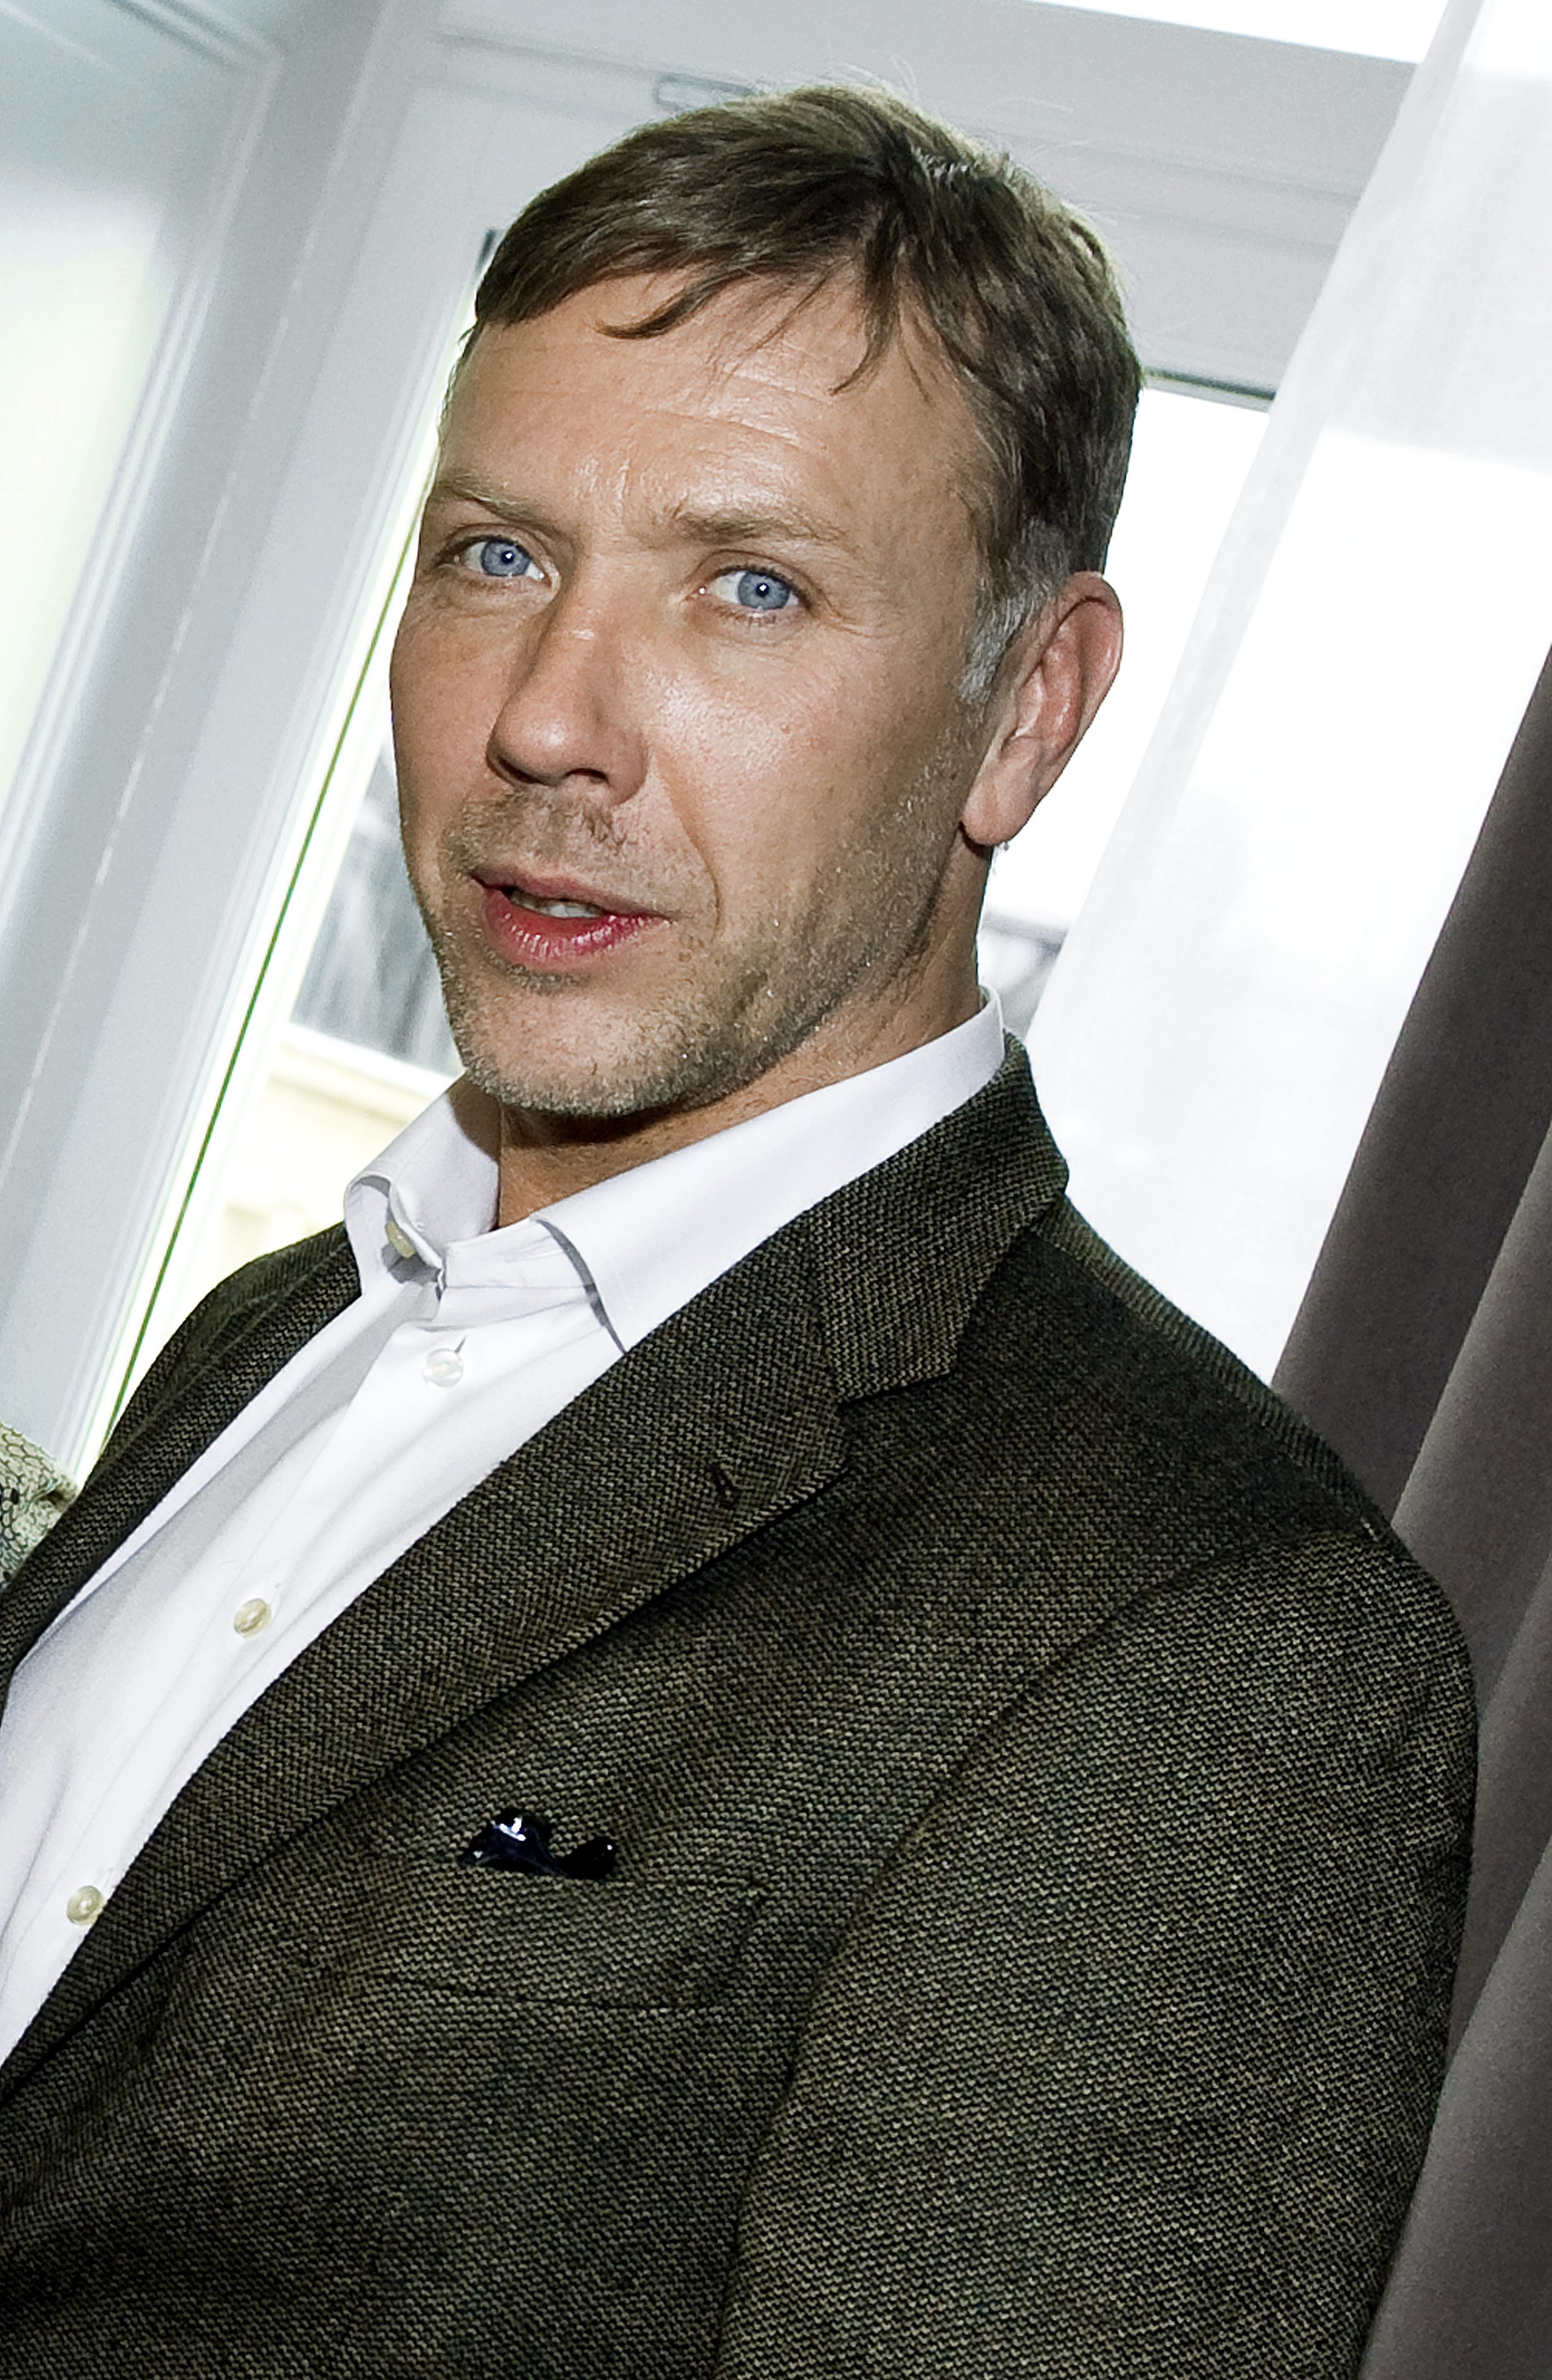 Ola Rapace, Film, Fight, Slåss, Hollywood, Mikael Persbrandt